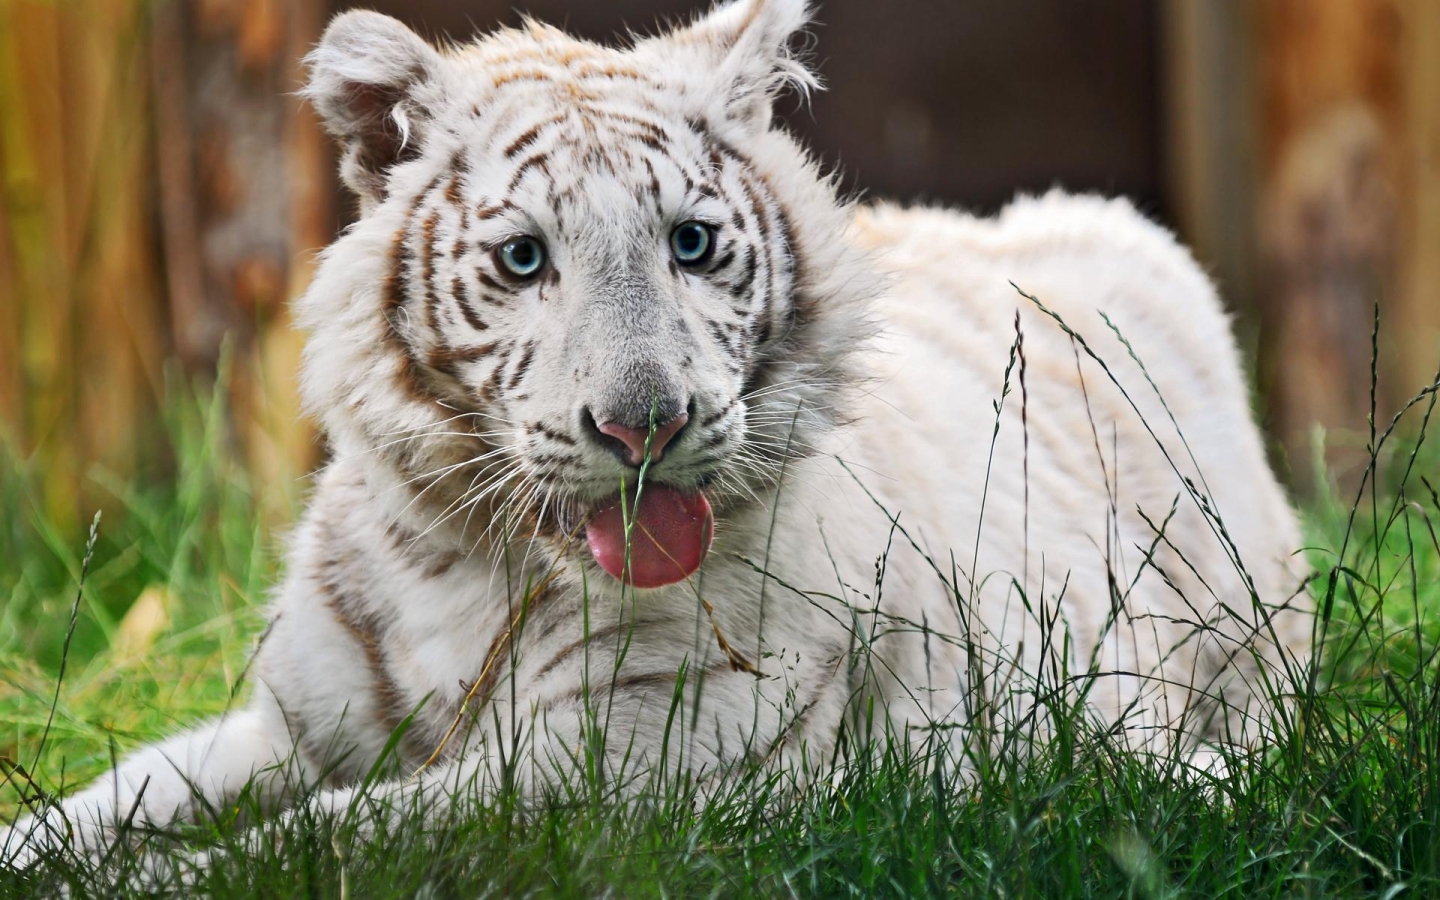 tiger photo white tiger wallpaper widescreen lion and white tiger